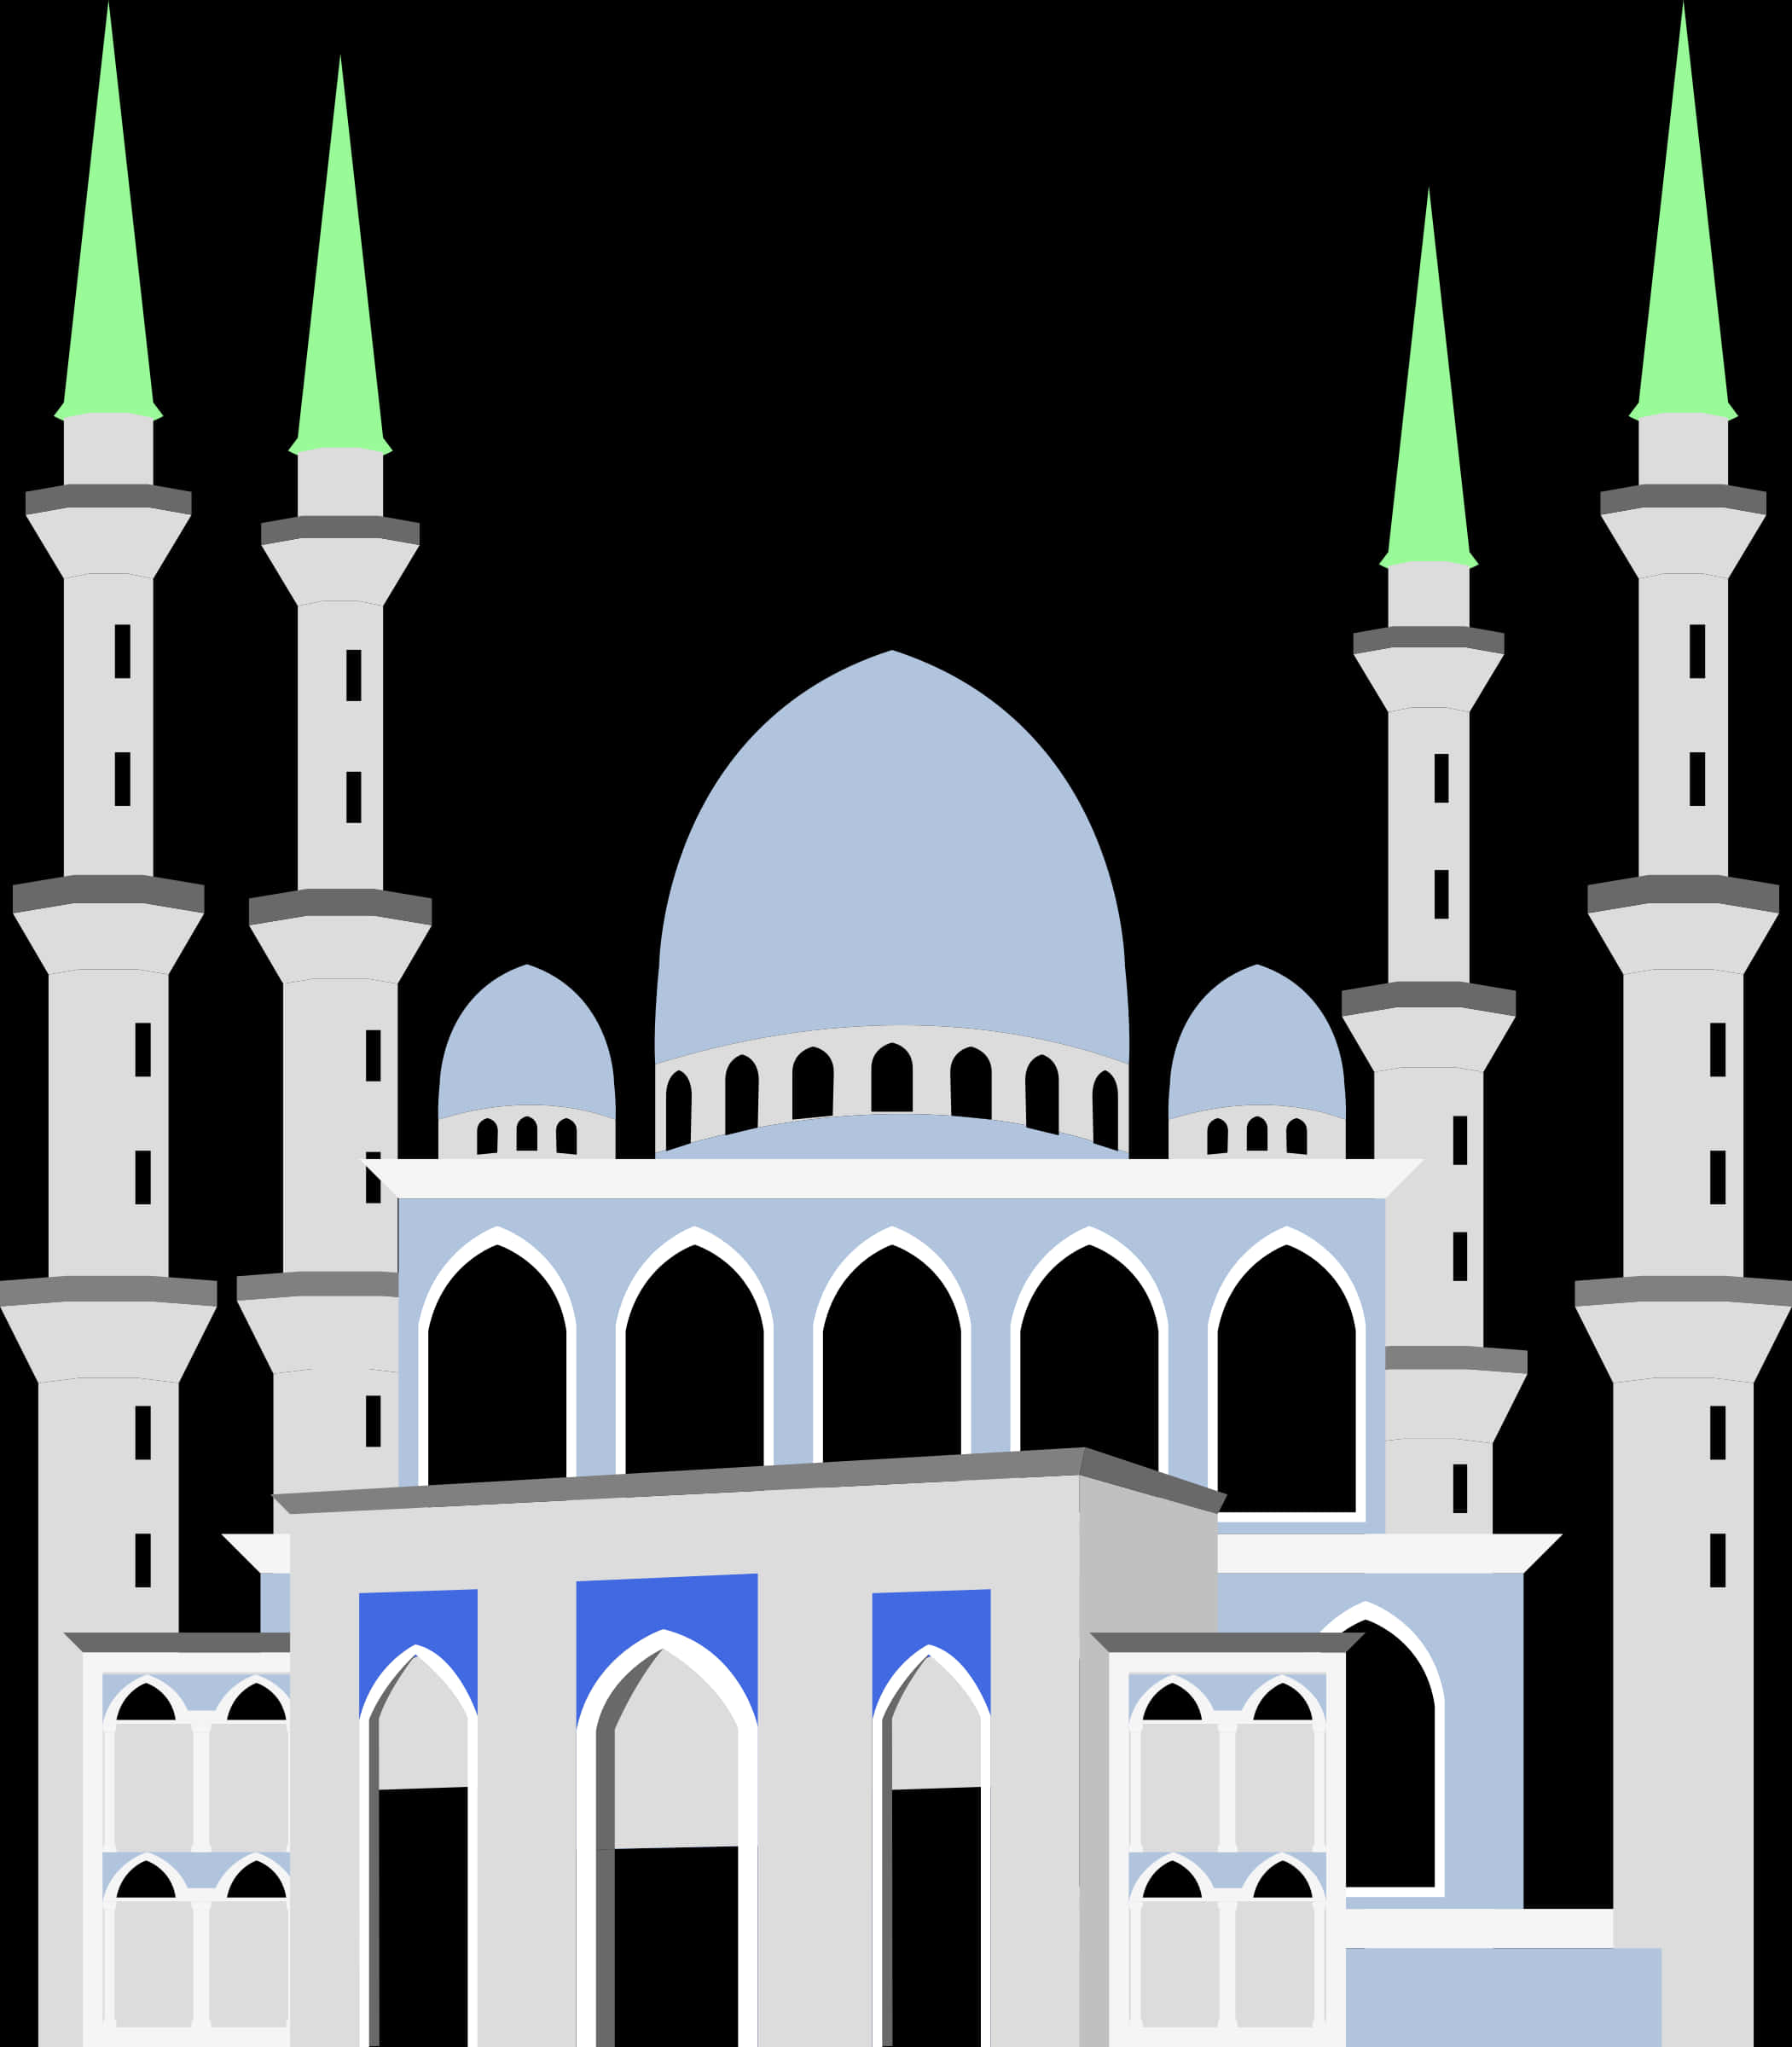 A Building With Towers And A Dome